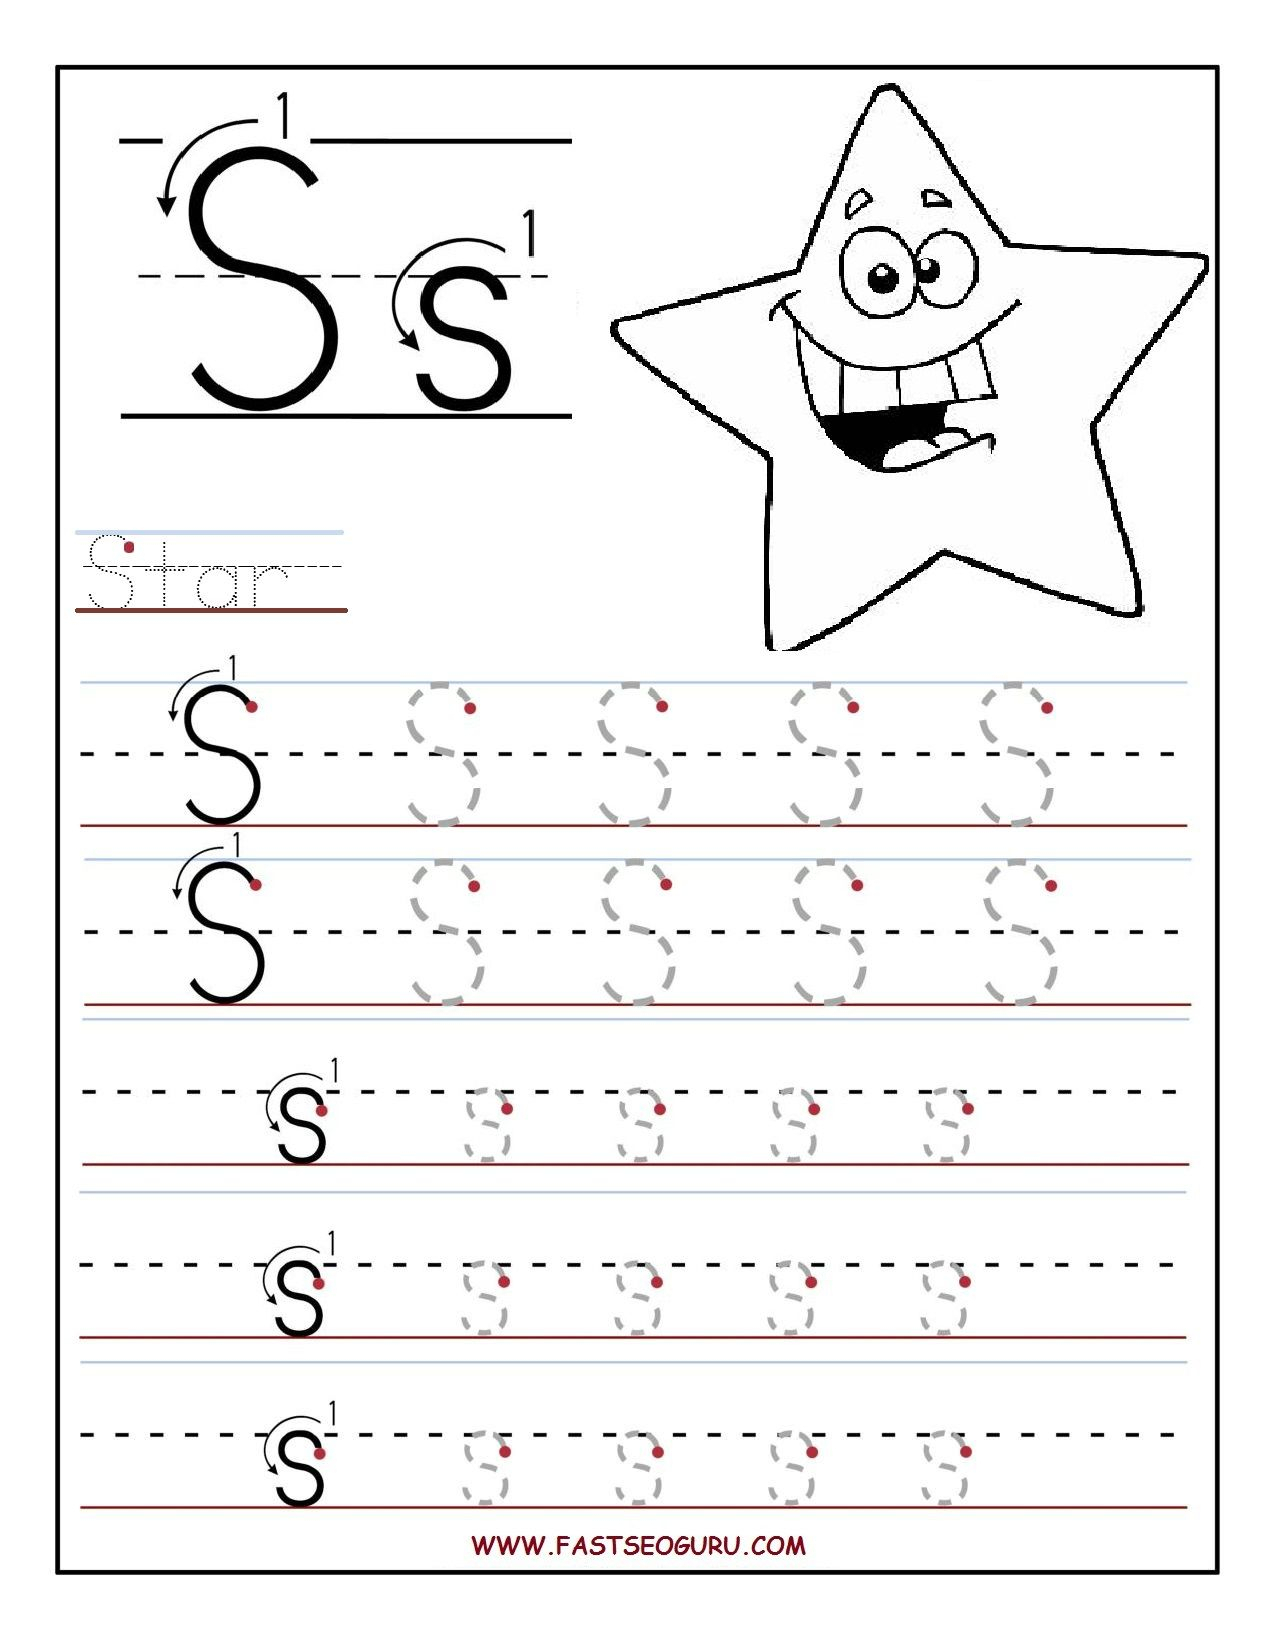 Printable Cursive Alphabet Worksheets Abitlikethis pertaining to Tracing Letters Activity Sheets